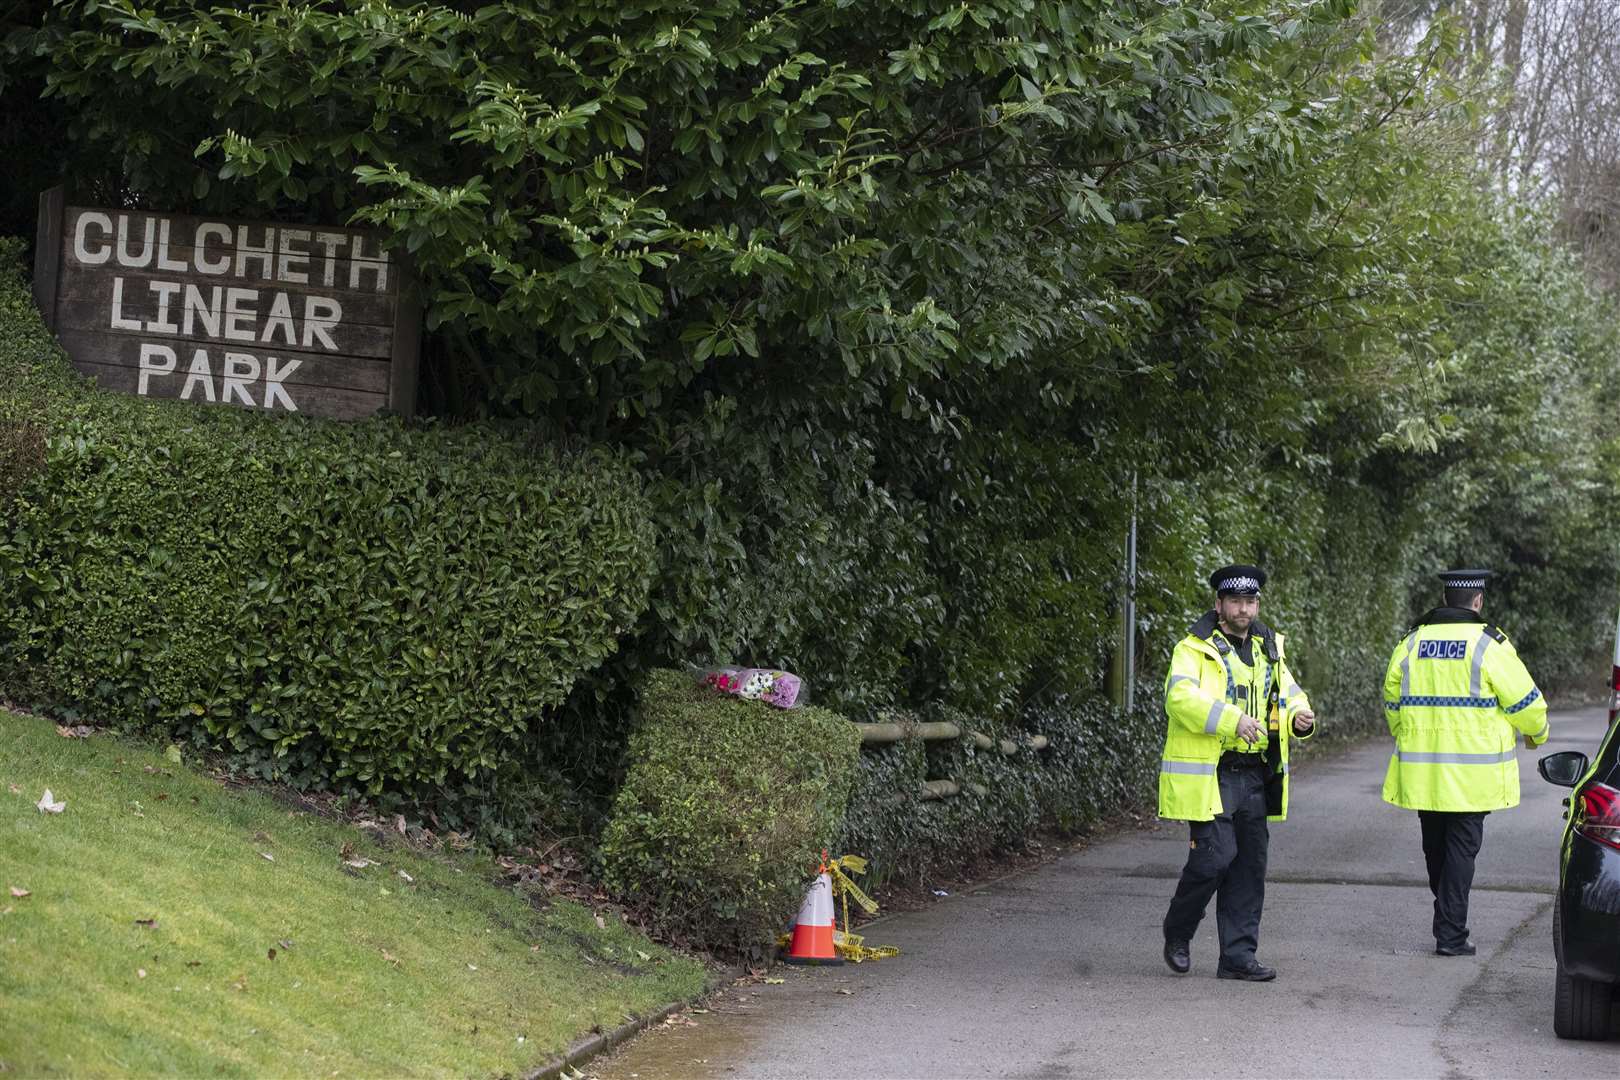 Police at the scene in Culcheth Linear Park in Warrington, Cheshire (Jason Roberts/PA)